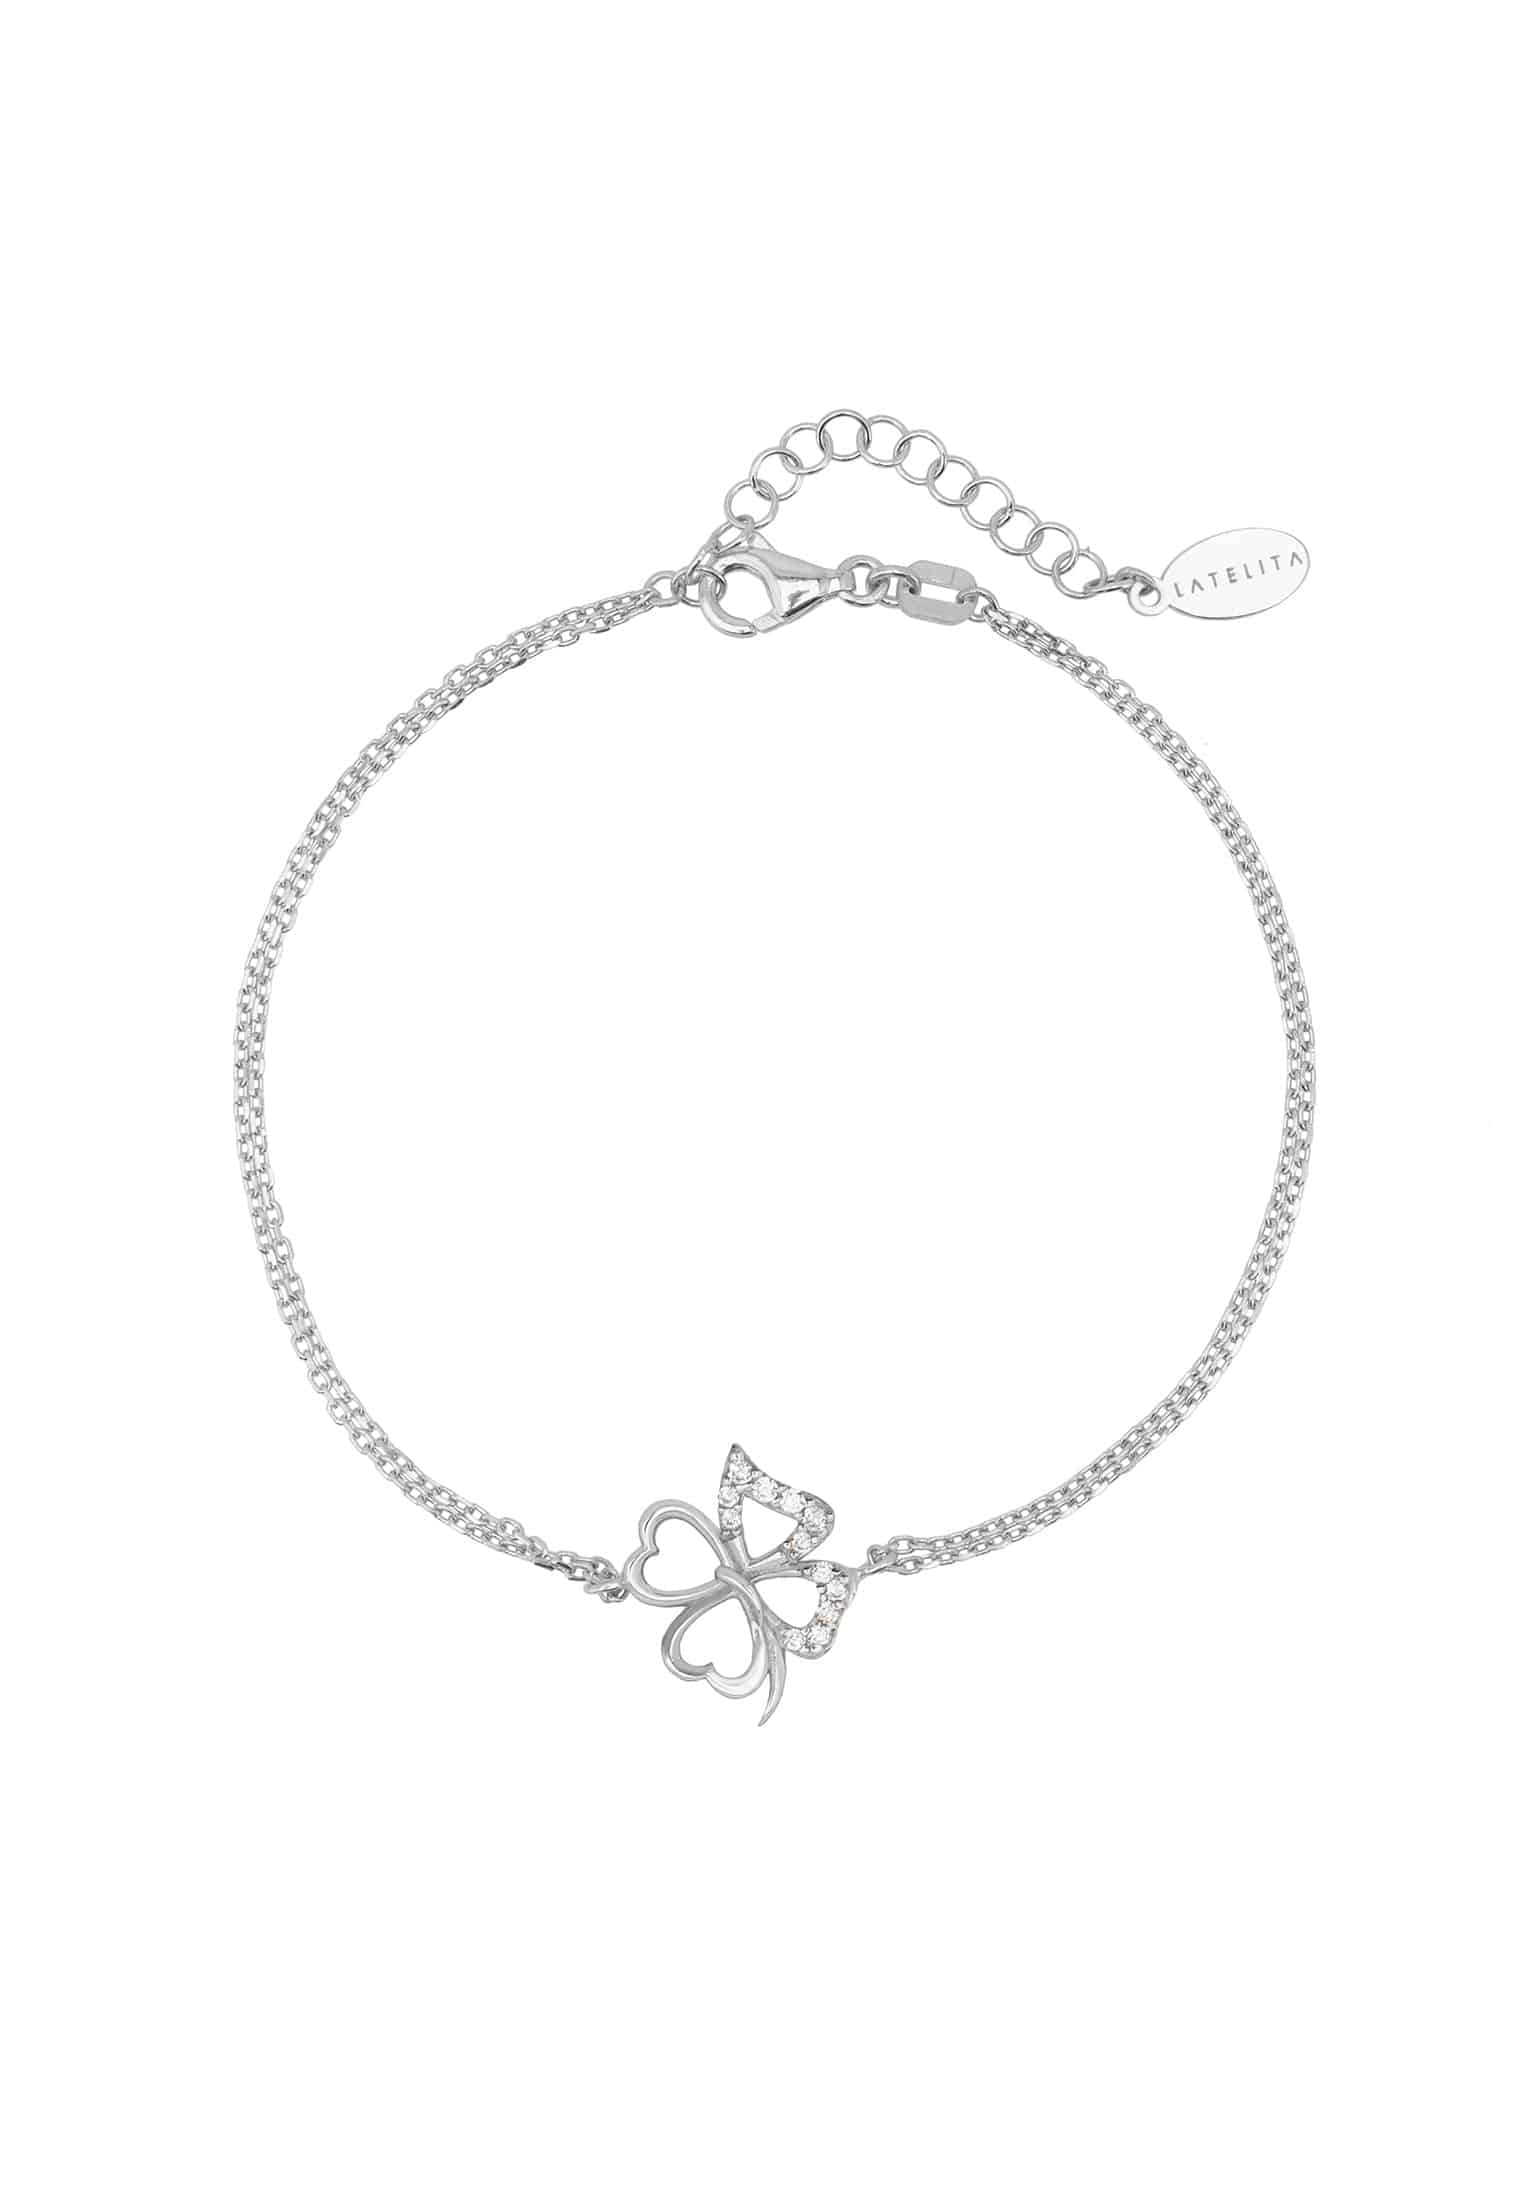 Sterling Silver Lucky Shamrock Clover Bracelet with Zirconia Accents - Jewelry & Watches - Bijou Her -  -  - 